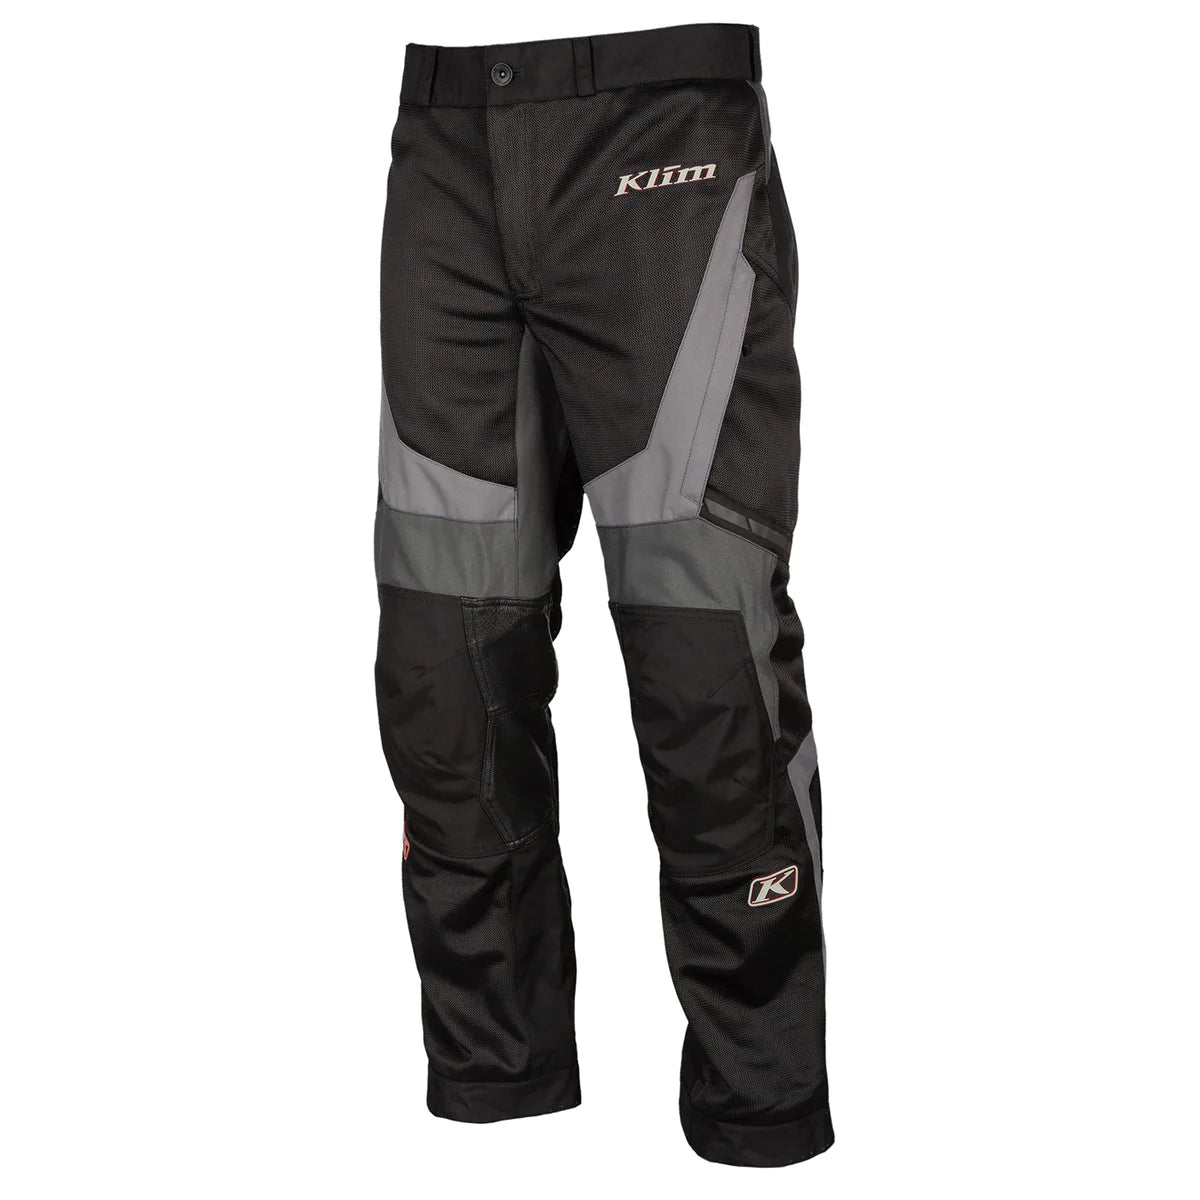 Klim Induction Stealth Black Pant for motorcycles